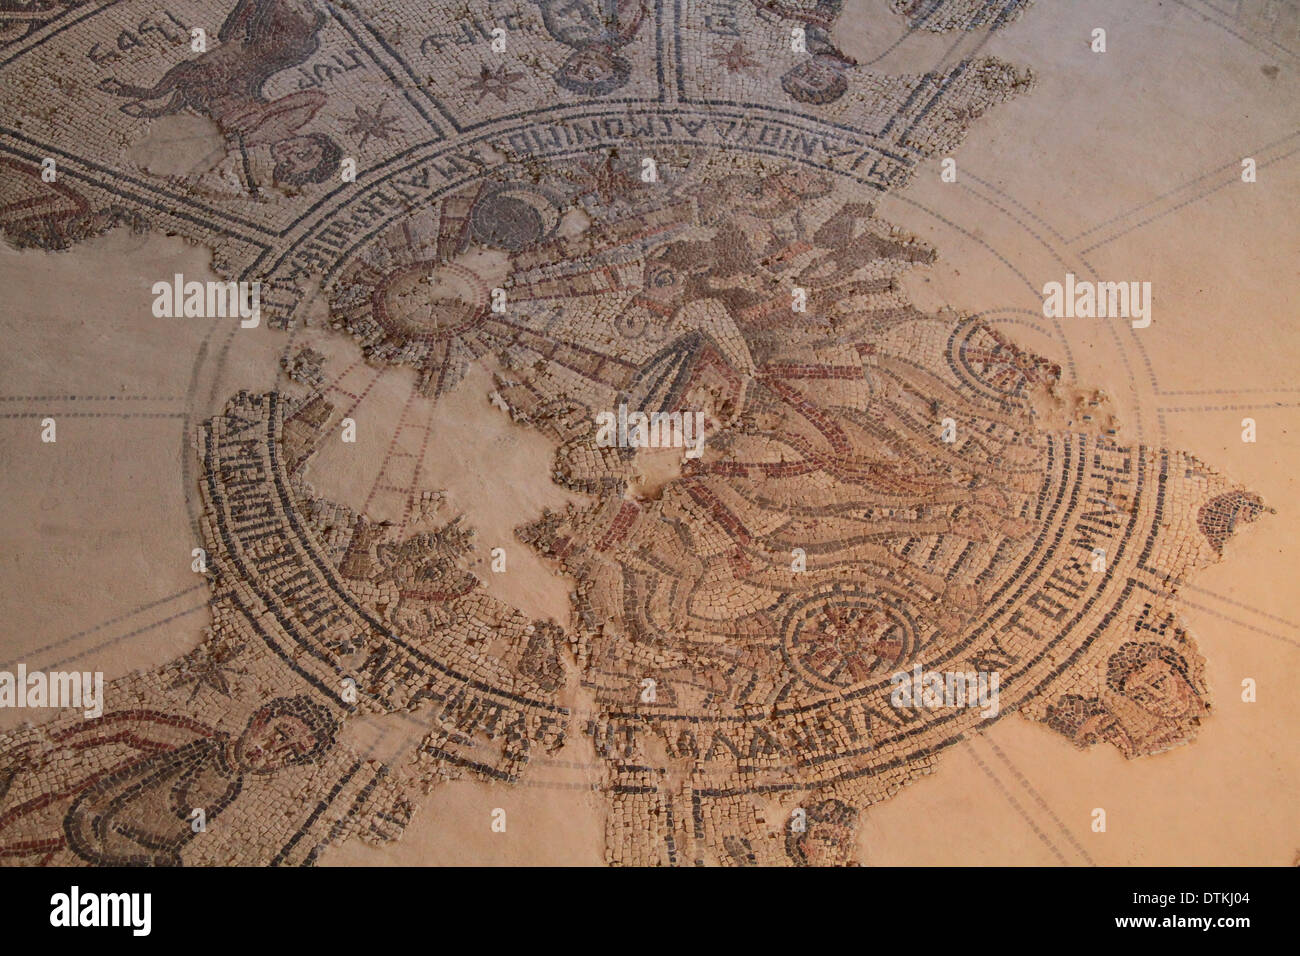 Israel, Zippori in the lower Galilee, the mosaic at the ancient Synagogue, the Zodiac Stock Photo